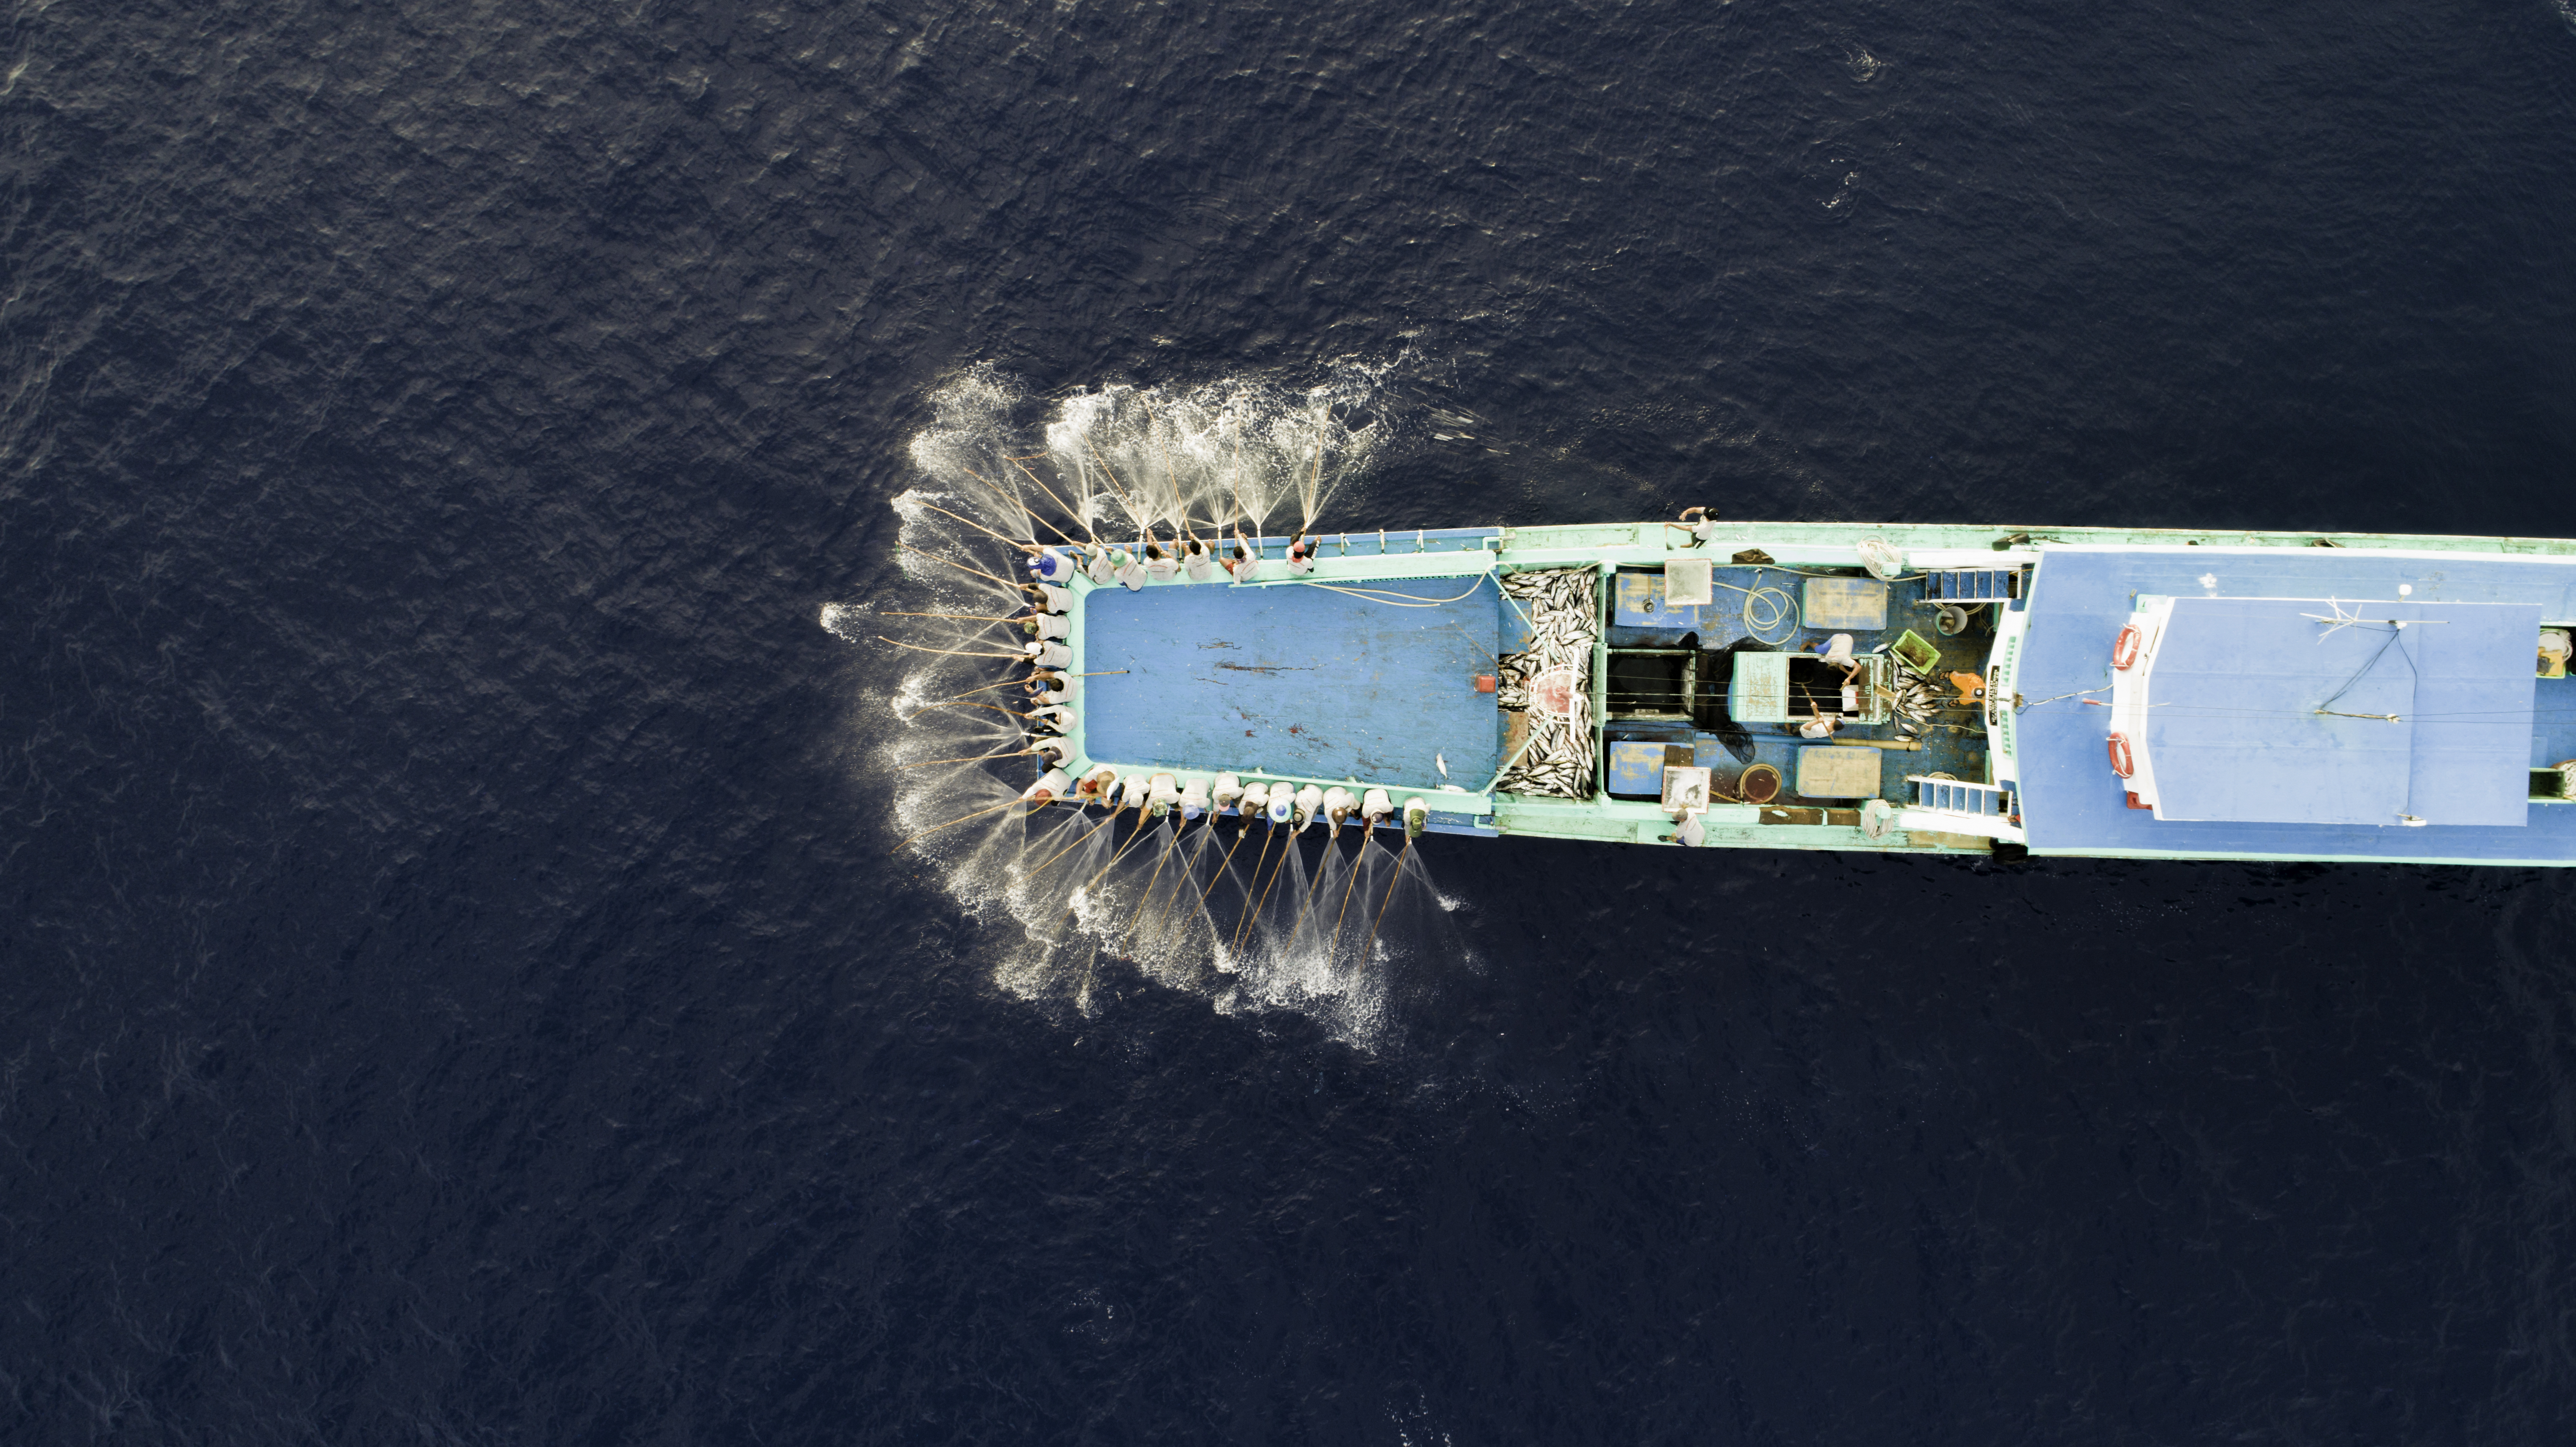 Drone shot of pole and line fishers fishing on a large vessel